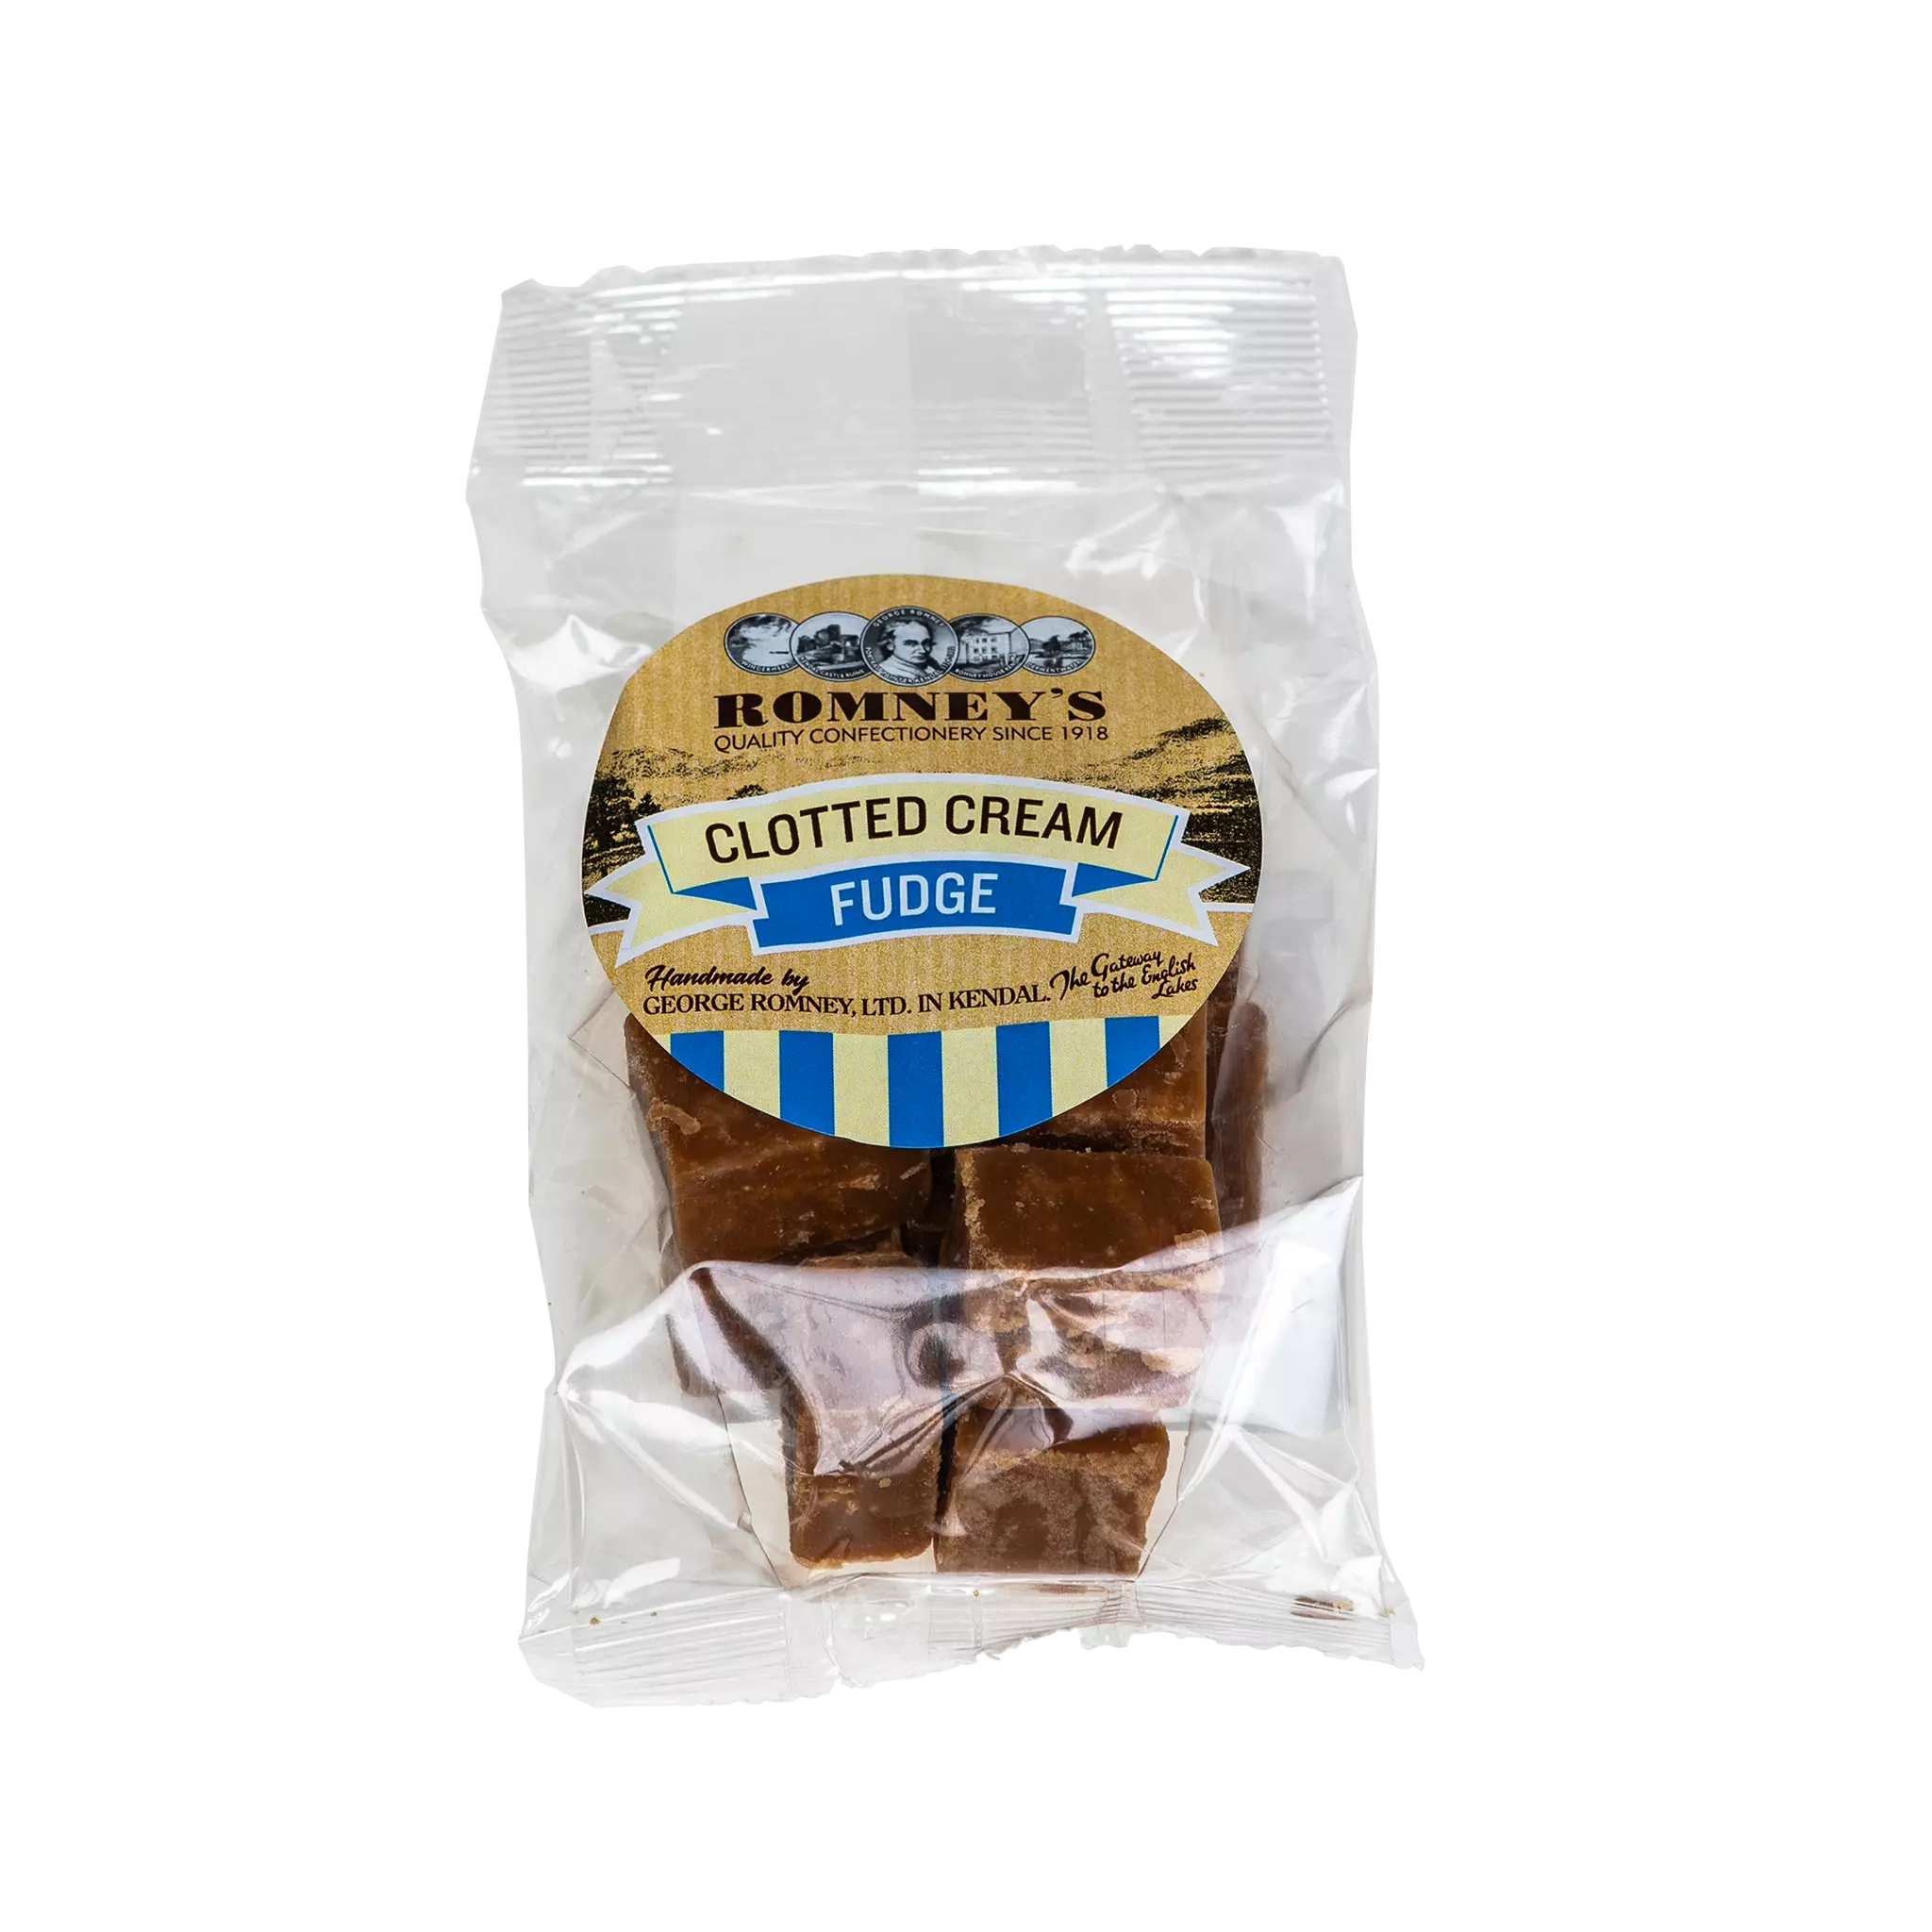 A transparent bag containing pieces of Fudge. The bag has a label on it that shows Romney's logo and says 'Clotted Cream Fudge'.